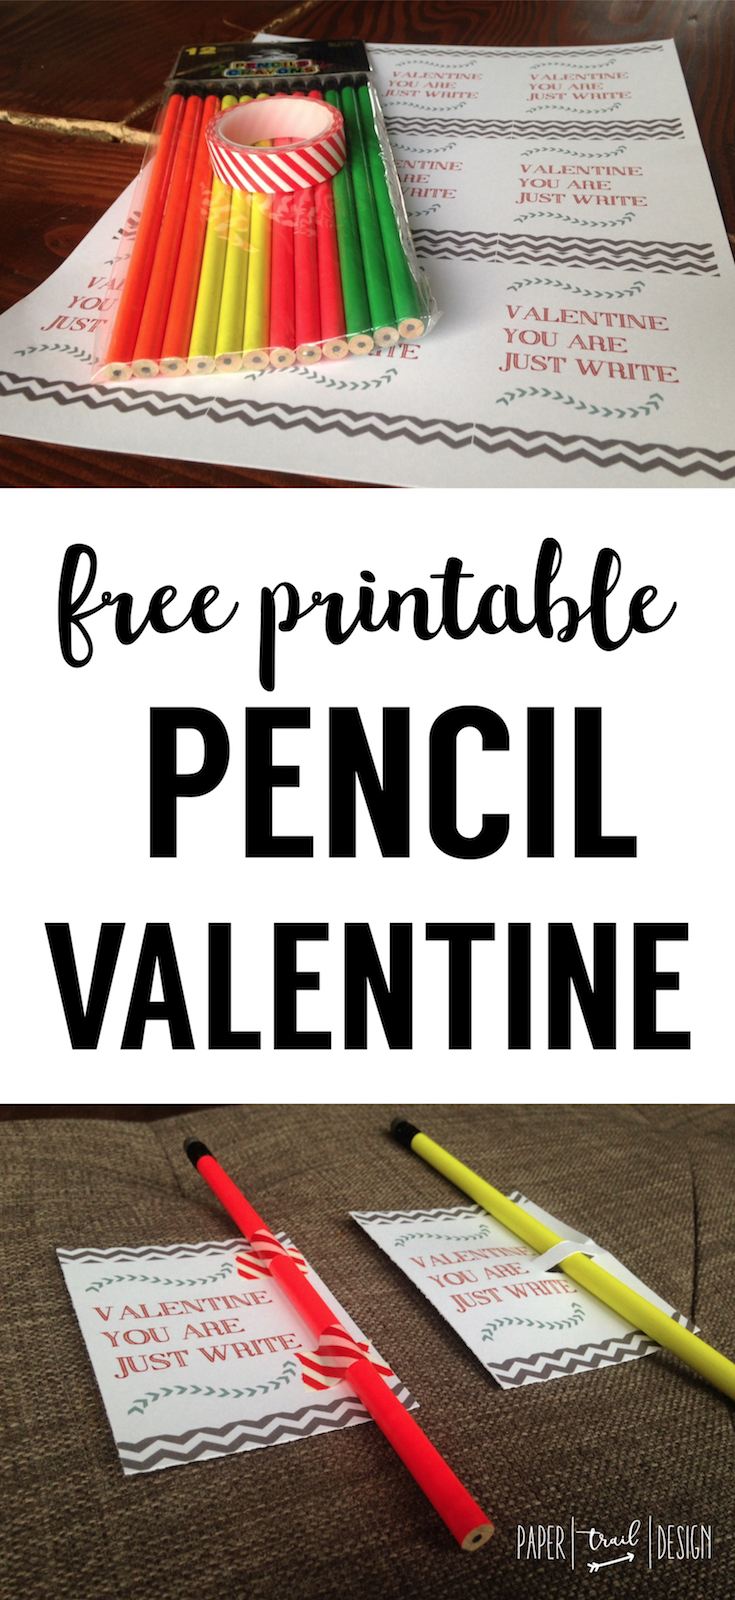 Free Printable Pencil Valentine. Print this awesome no candy valentine idea for your kids classroom valentines. Pencil valentine ideas for kids.